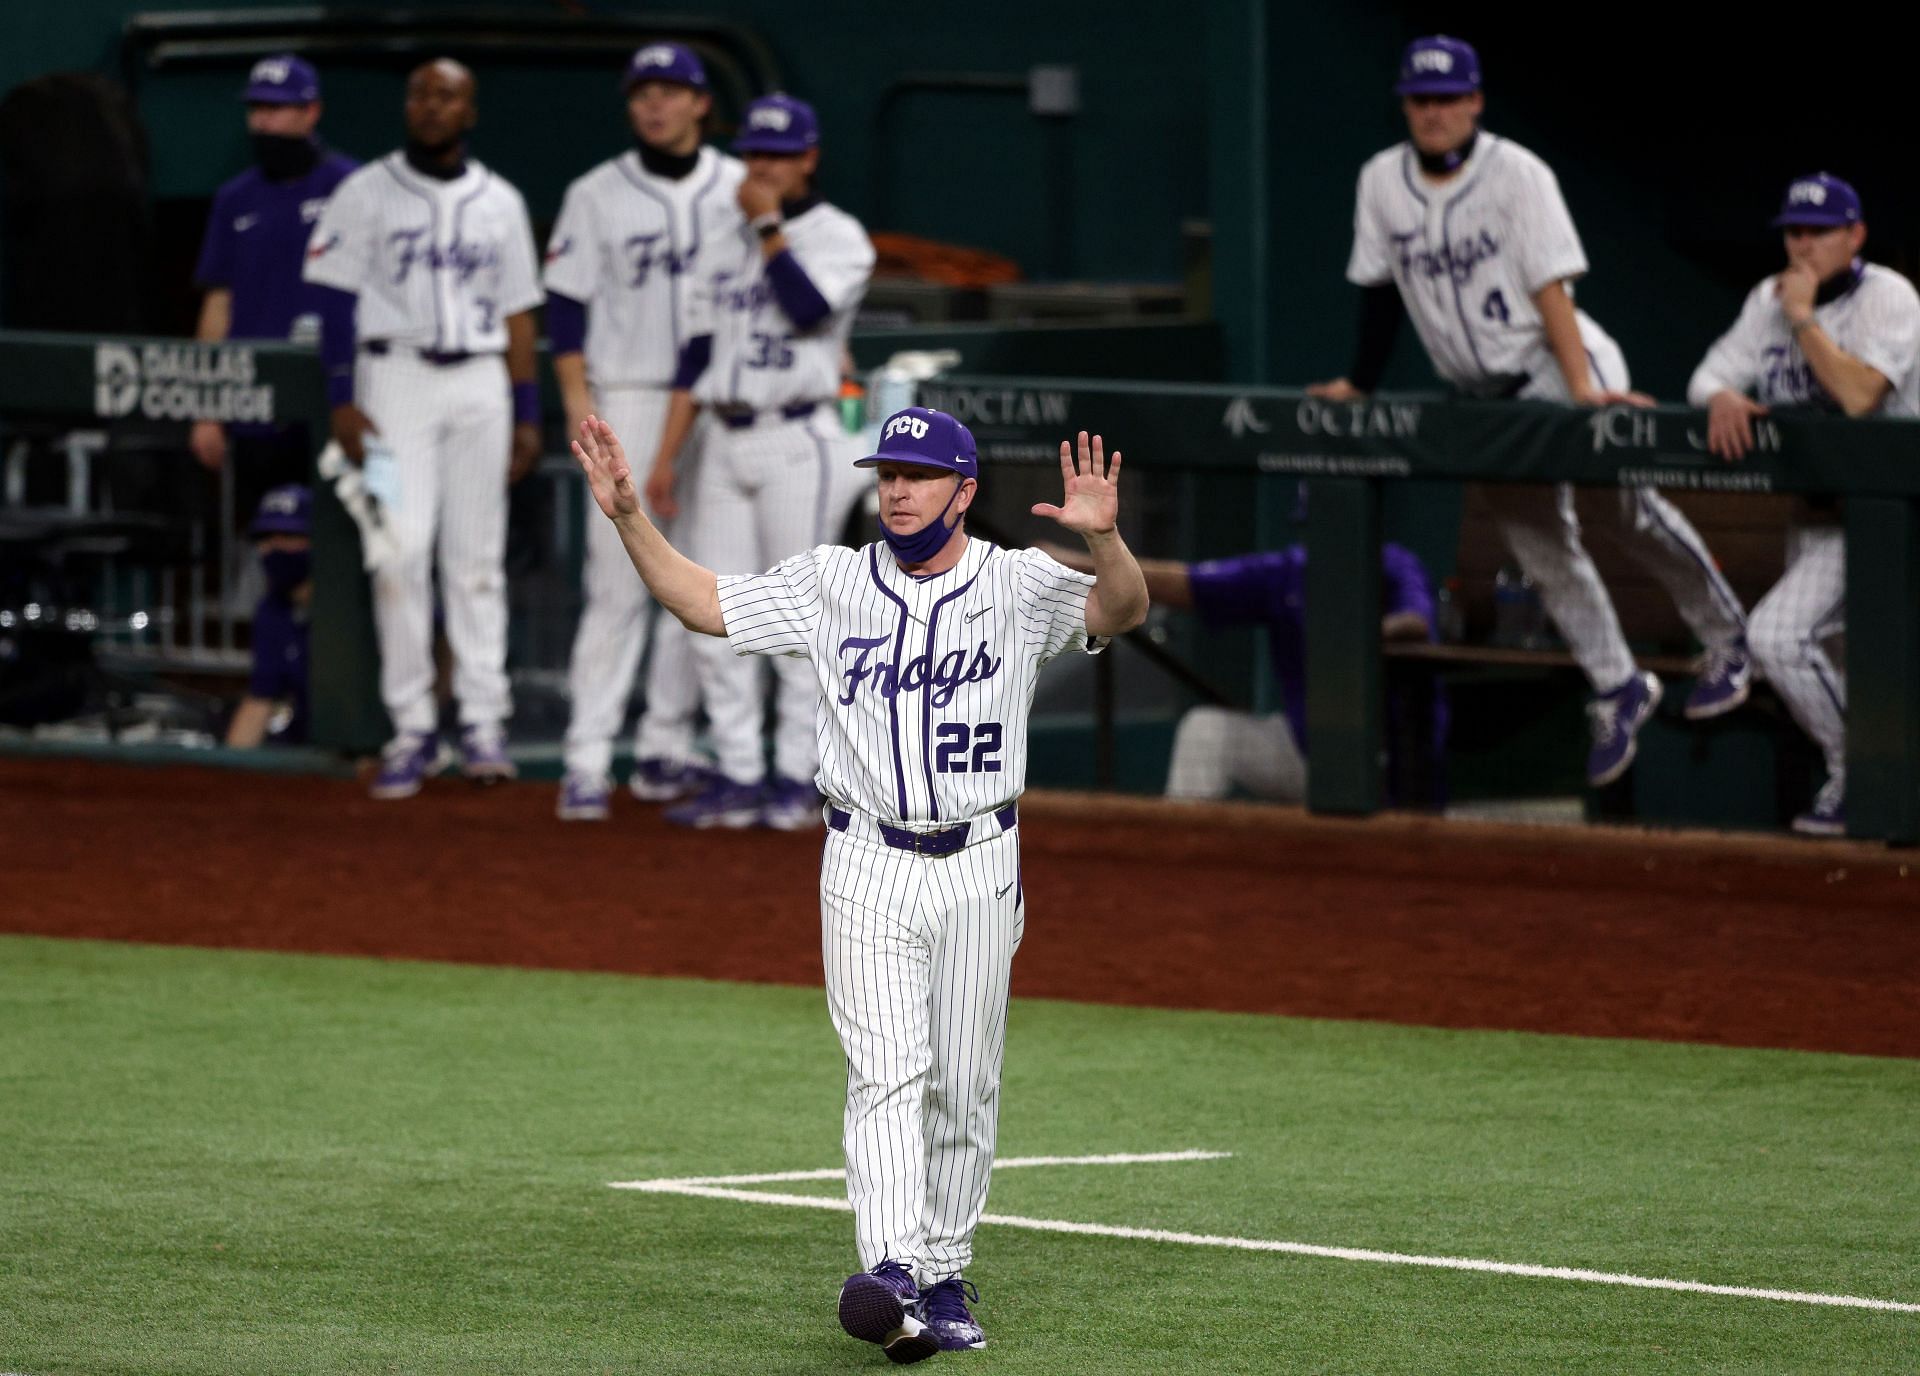 Will the Horned Frogs advance to the finals of the College World Series?